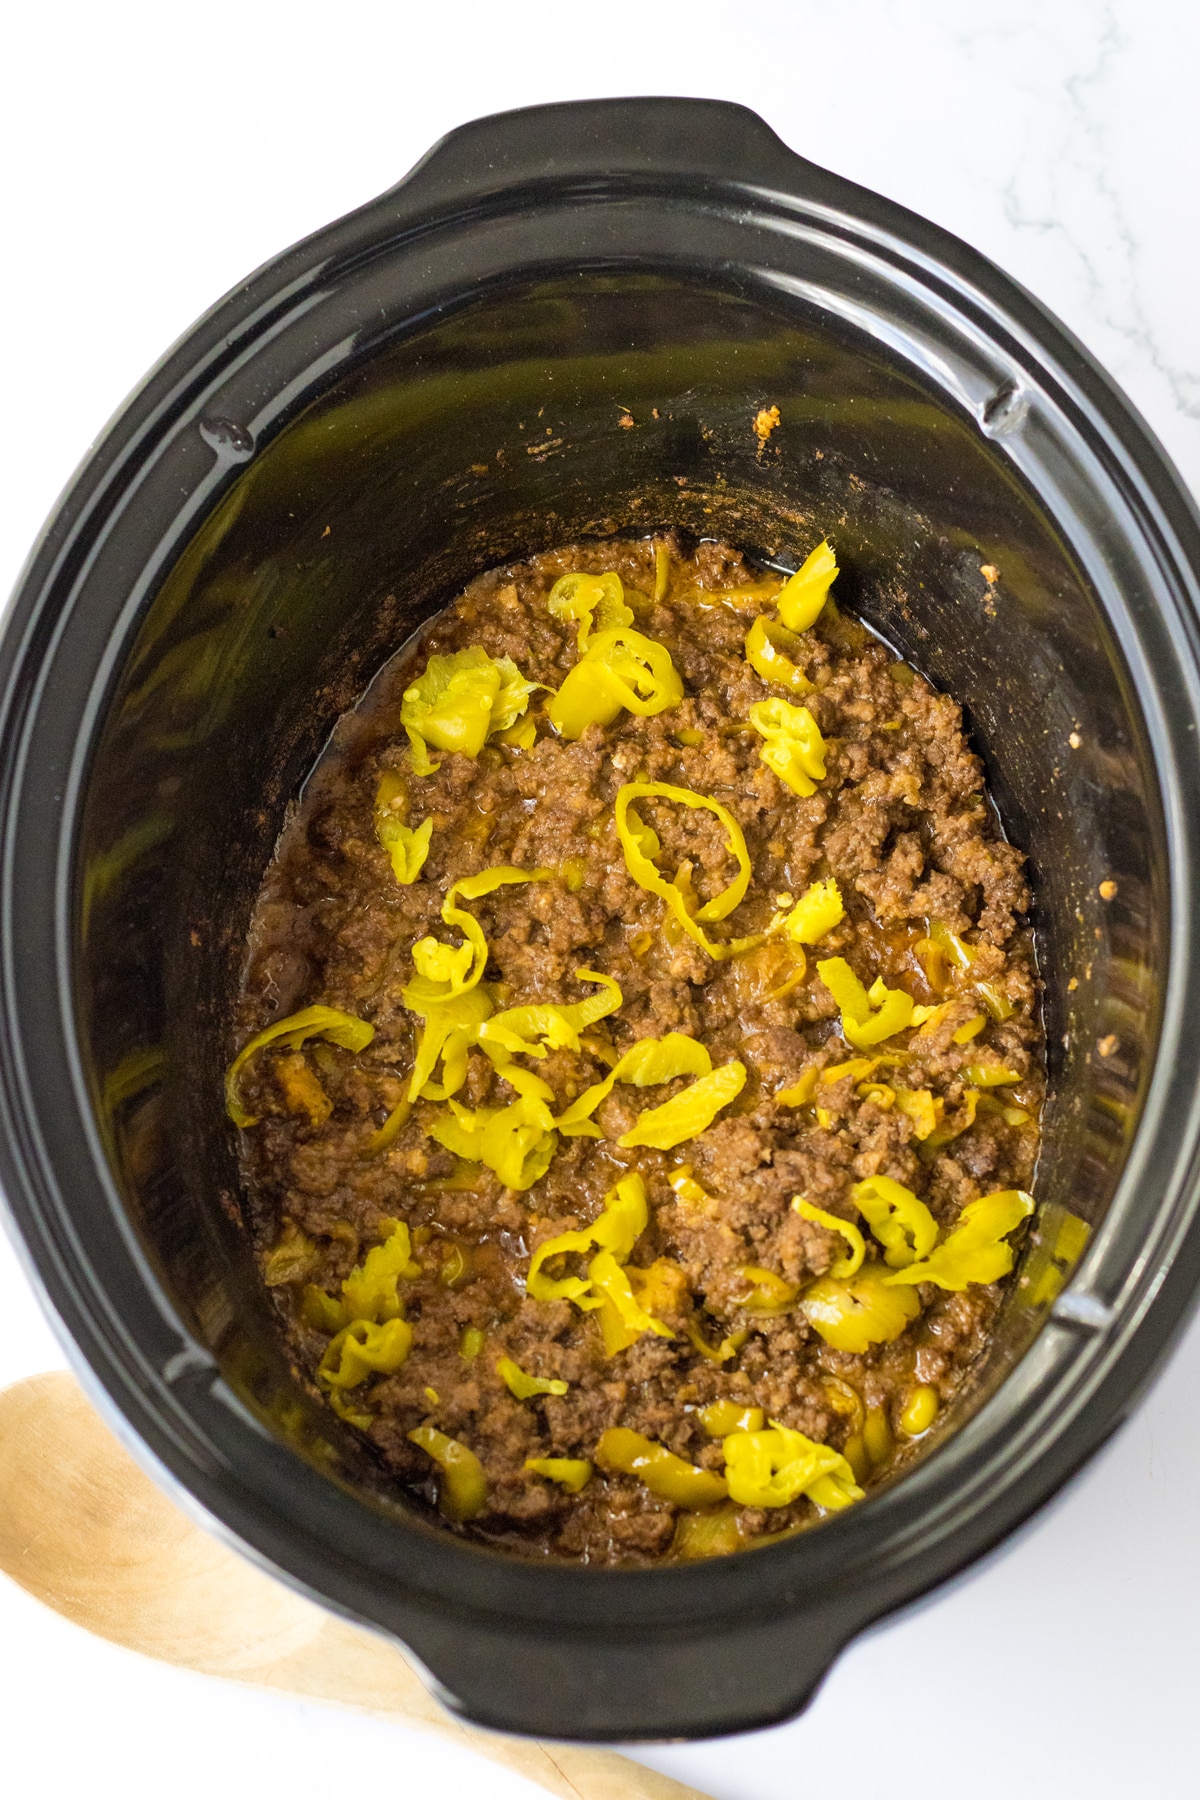 Next process in preparing is to mix Slow Cooker Mississippi Sloppy Joes in a crock pot filled with Sliced pepperoncini peppers and ground beef